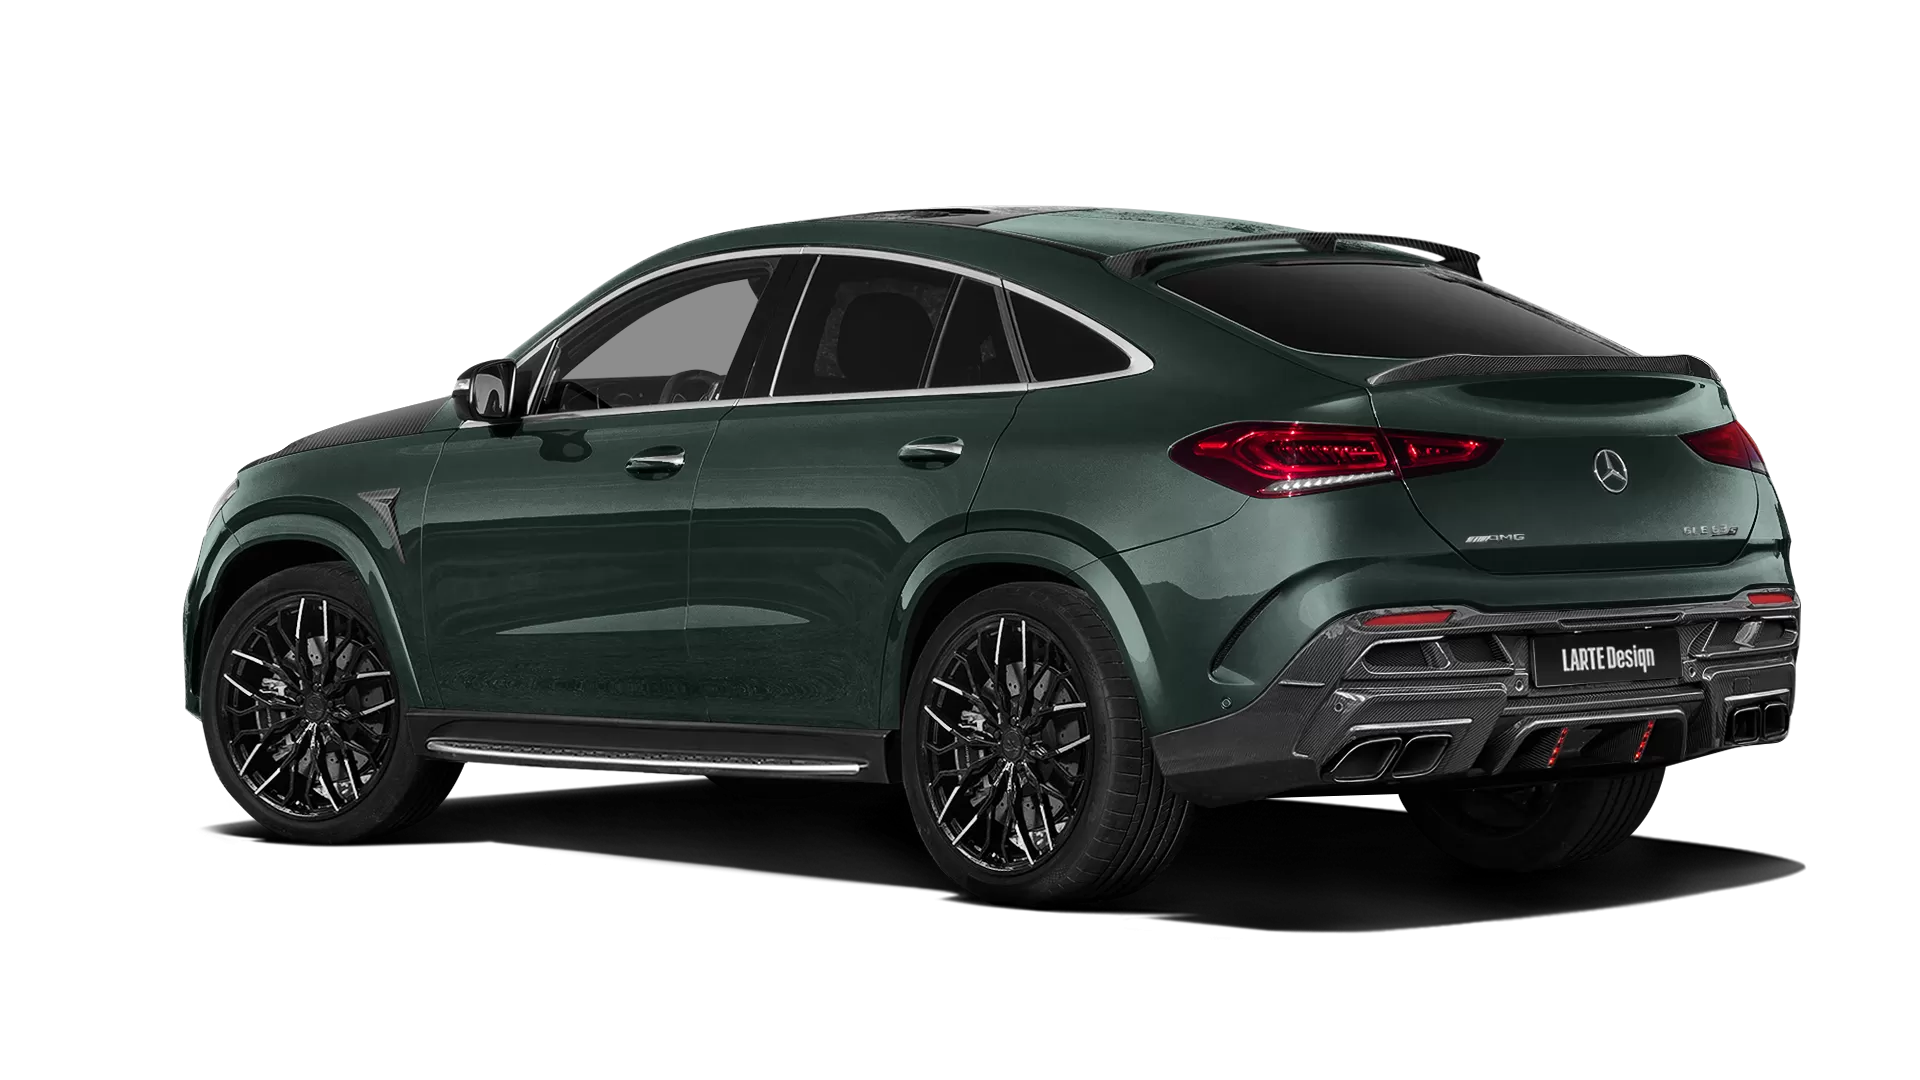 Mercedes GLE Coupe AMG 63 C167 with carbon body kit: back view shown in Emerald Green